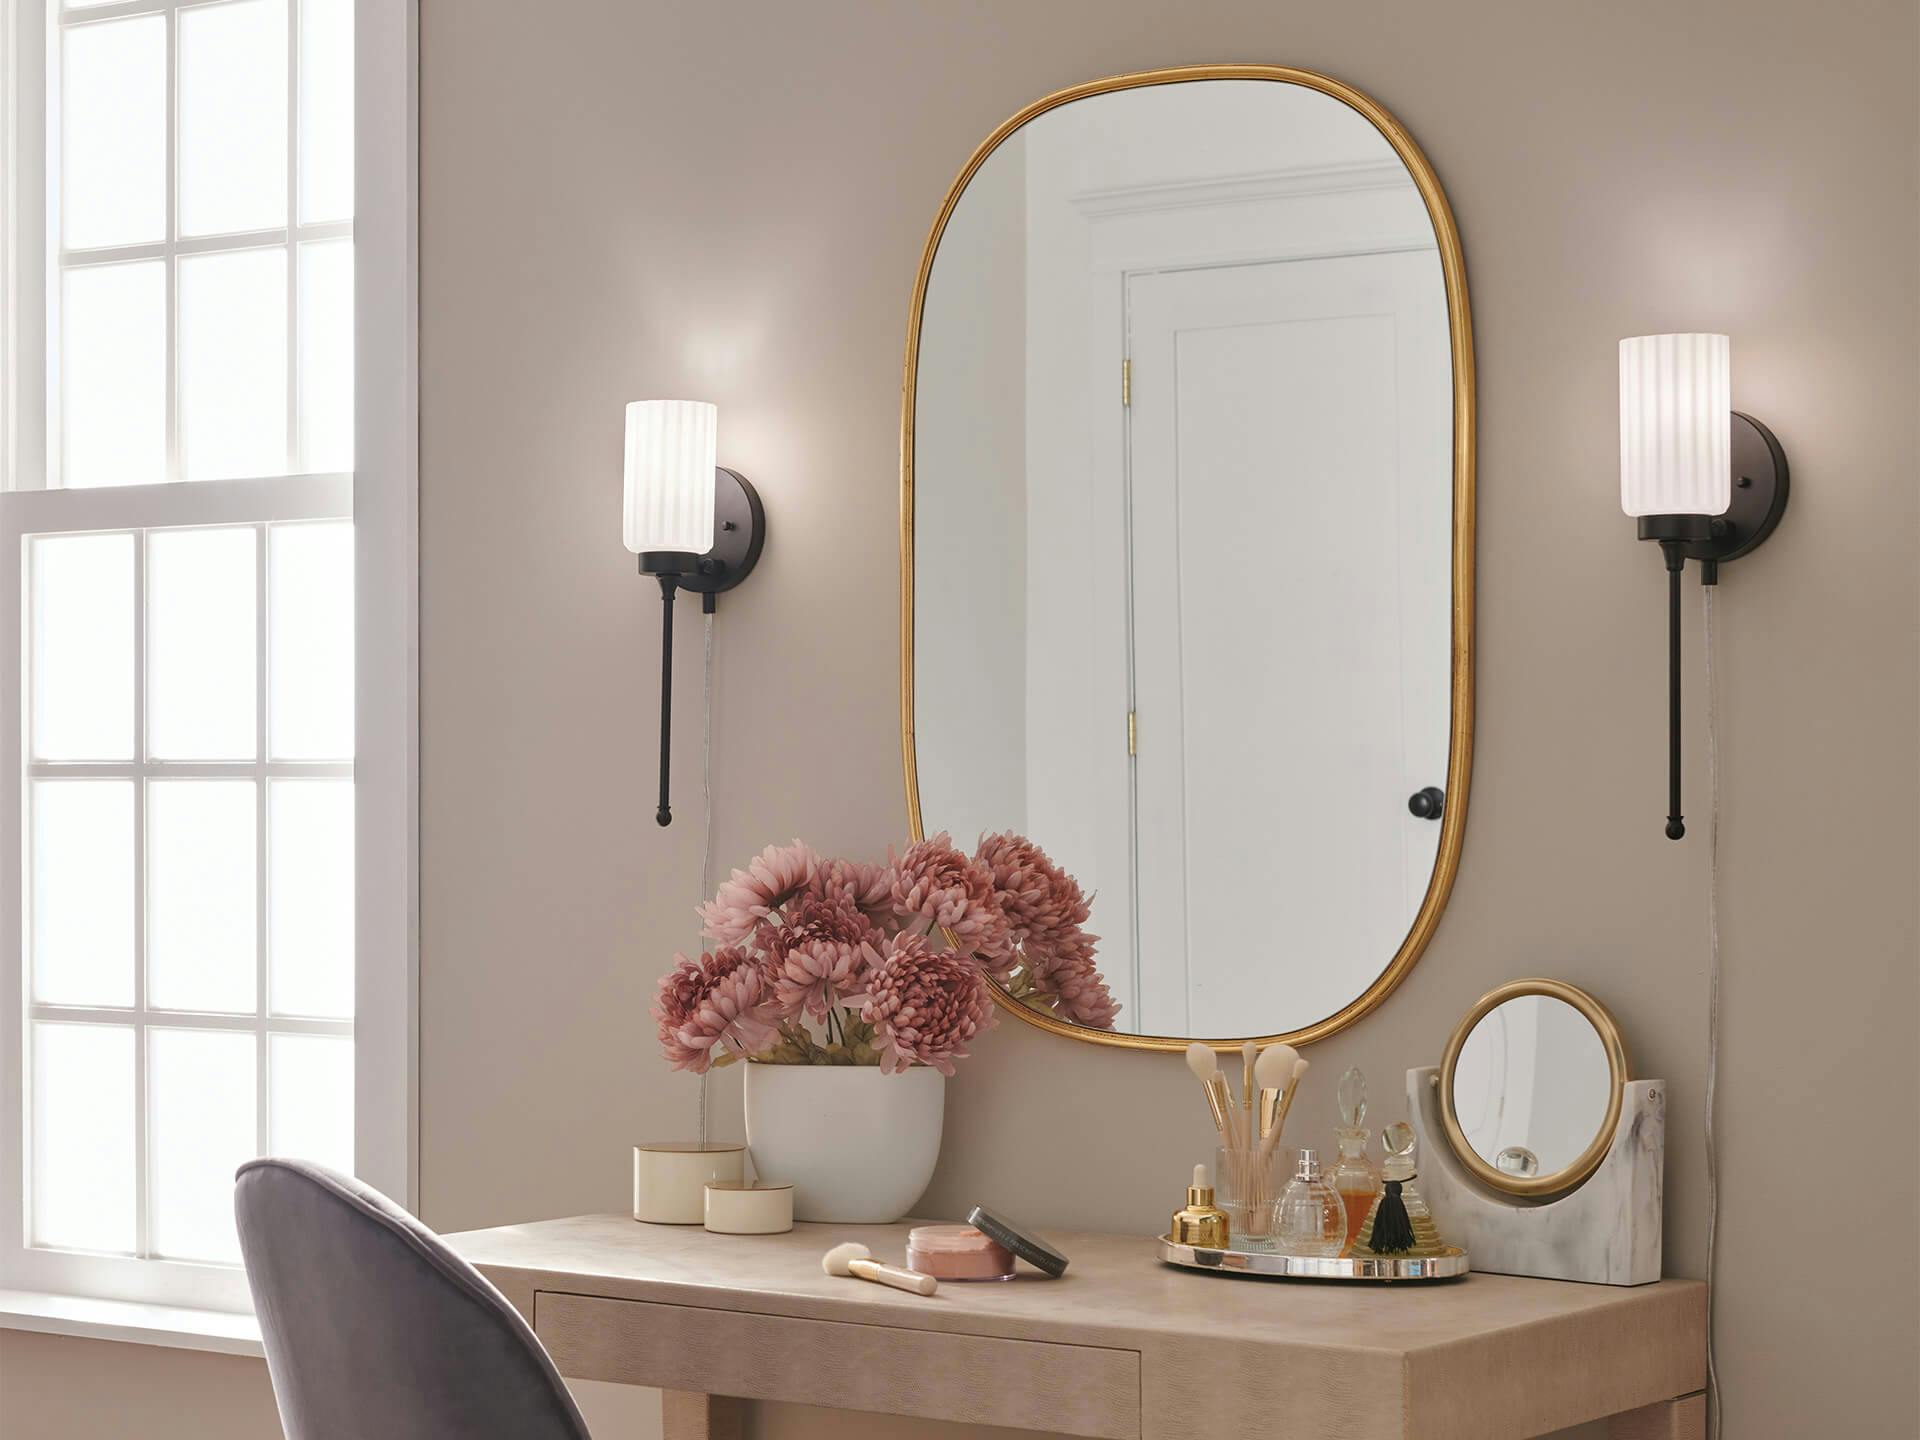 Bedroom vanity with Thelma wall sconces